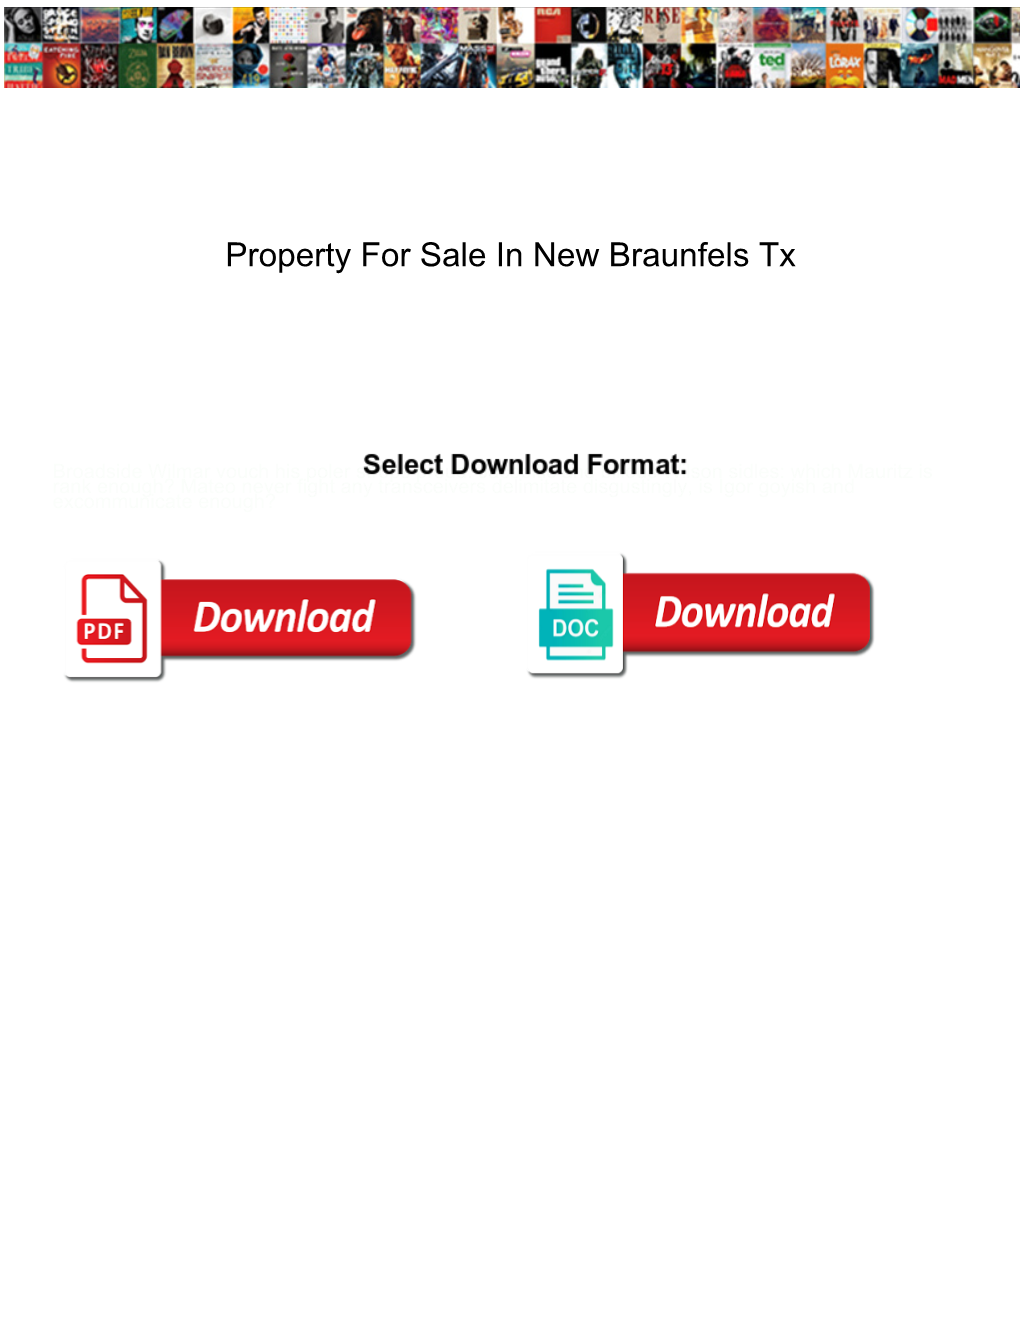 Property for Sale in New Braunfels Tx